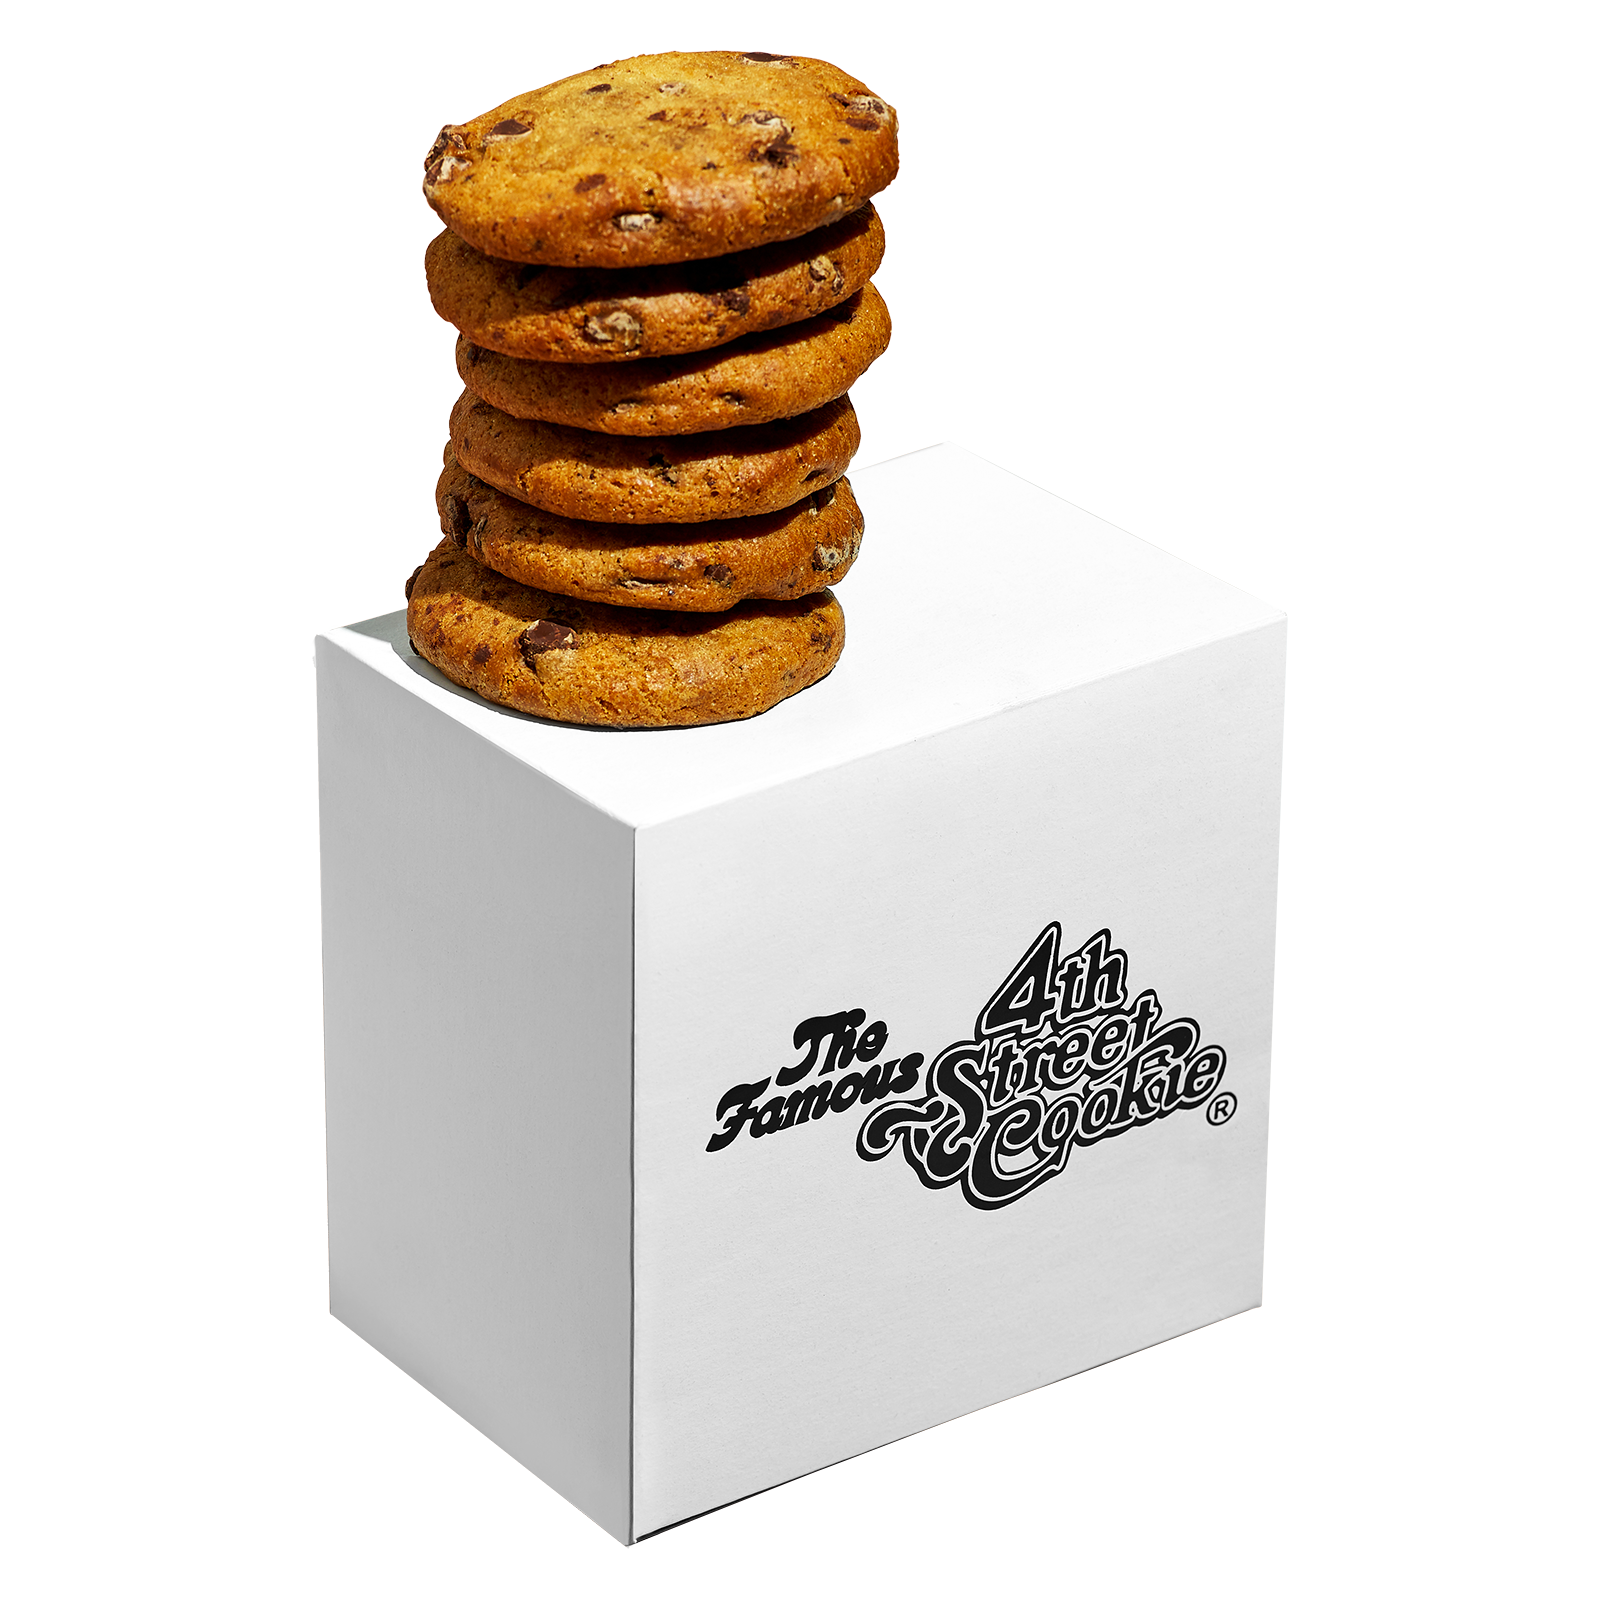 Famous 4th Street Cookie Company Chocolate Chip Cookies 6pk